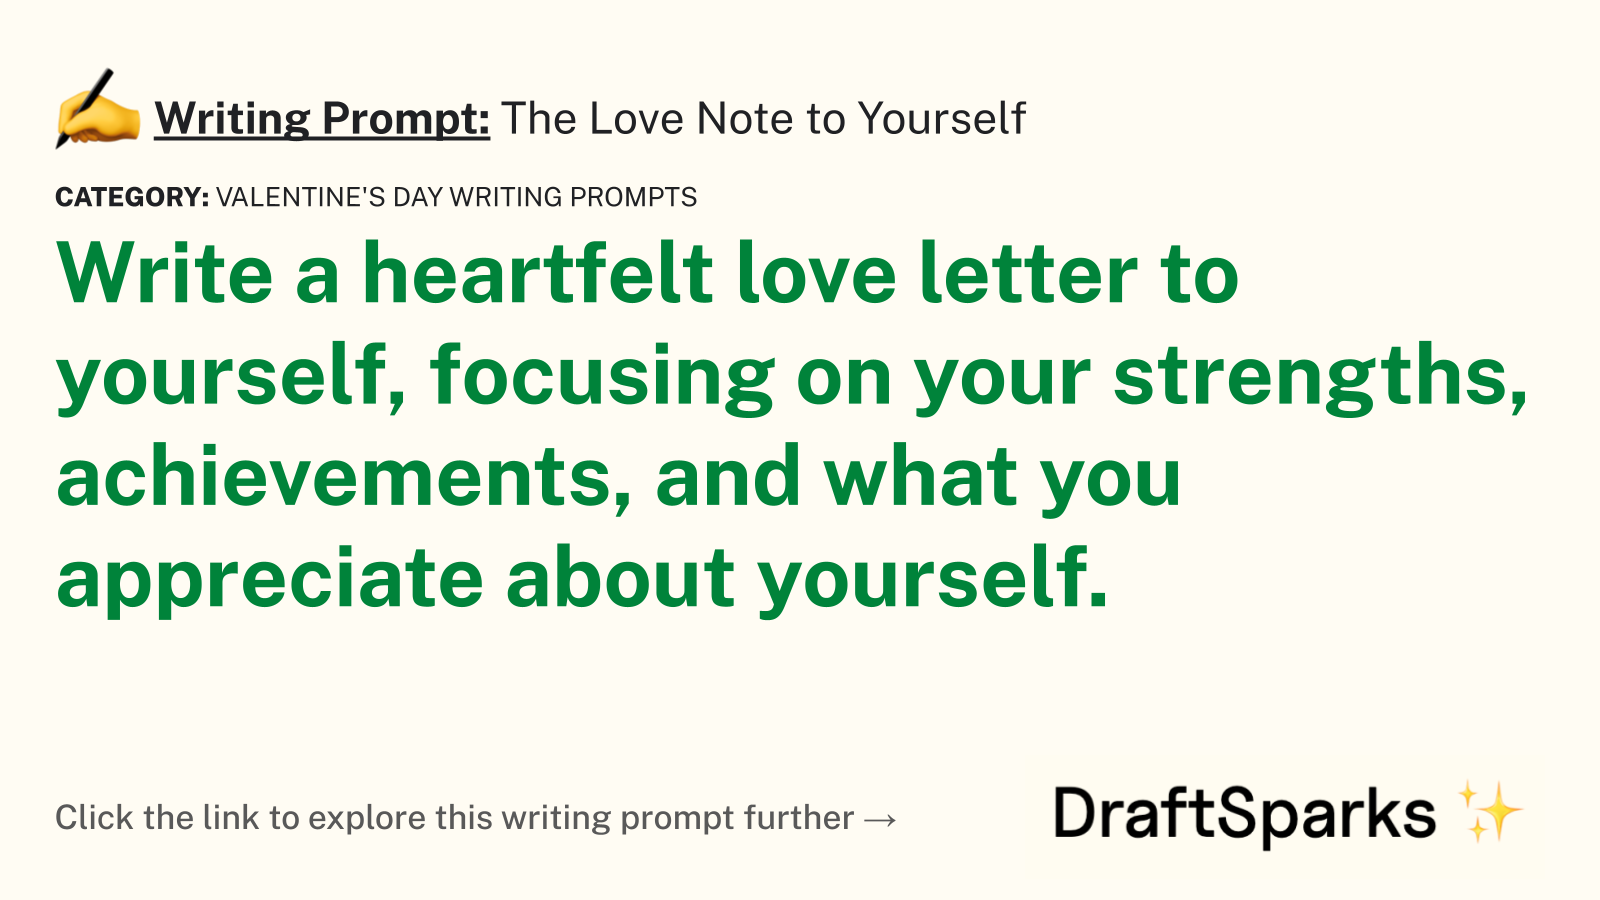 The Love Note to Yourself